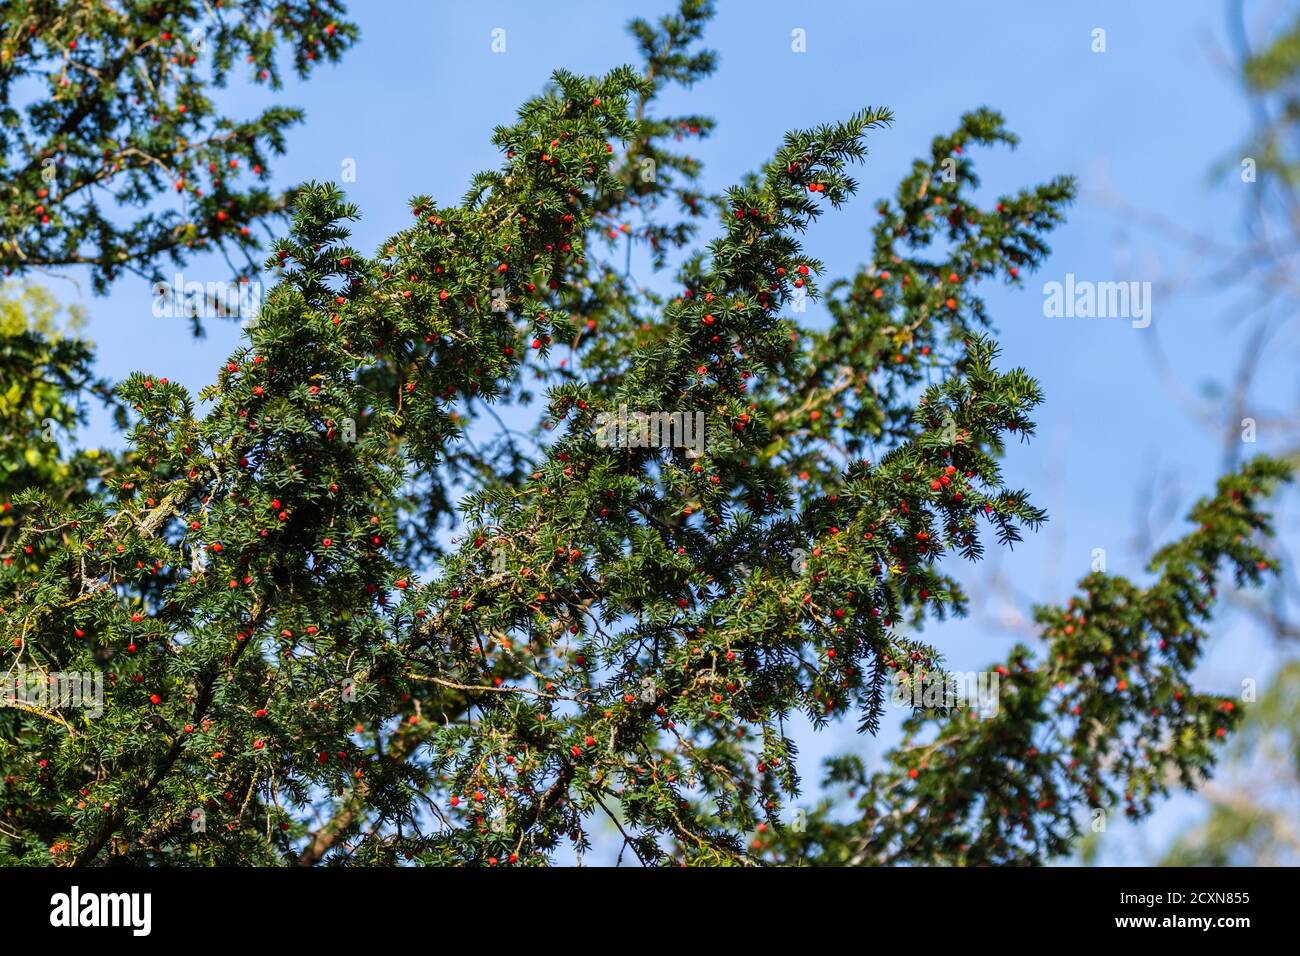 Branches from a Common Yew Tree (Taxus baccata, English Yew), an evergreen conifer tree with red fruits in Autumn in West Sussex, England, UK. Stock Photo